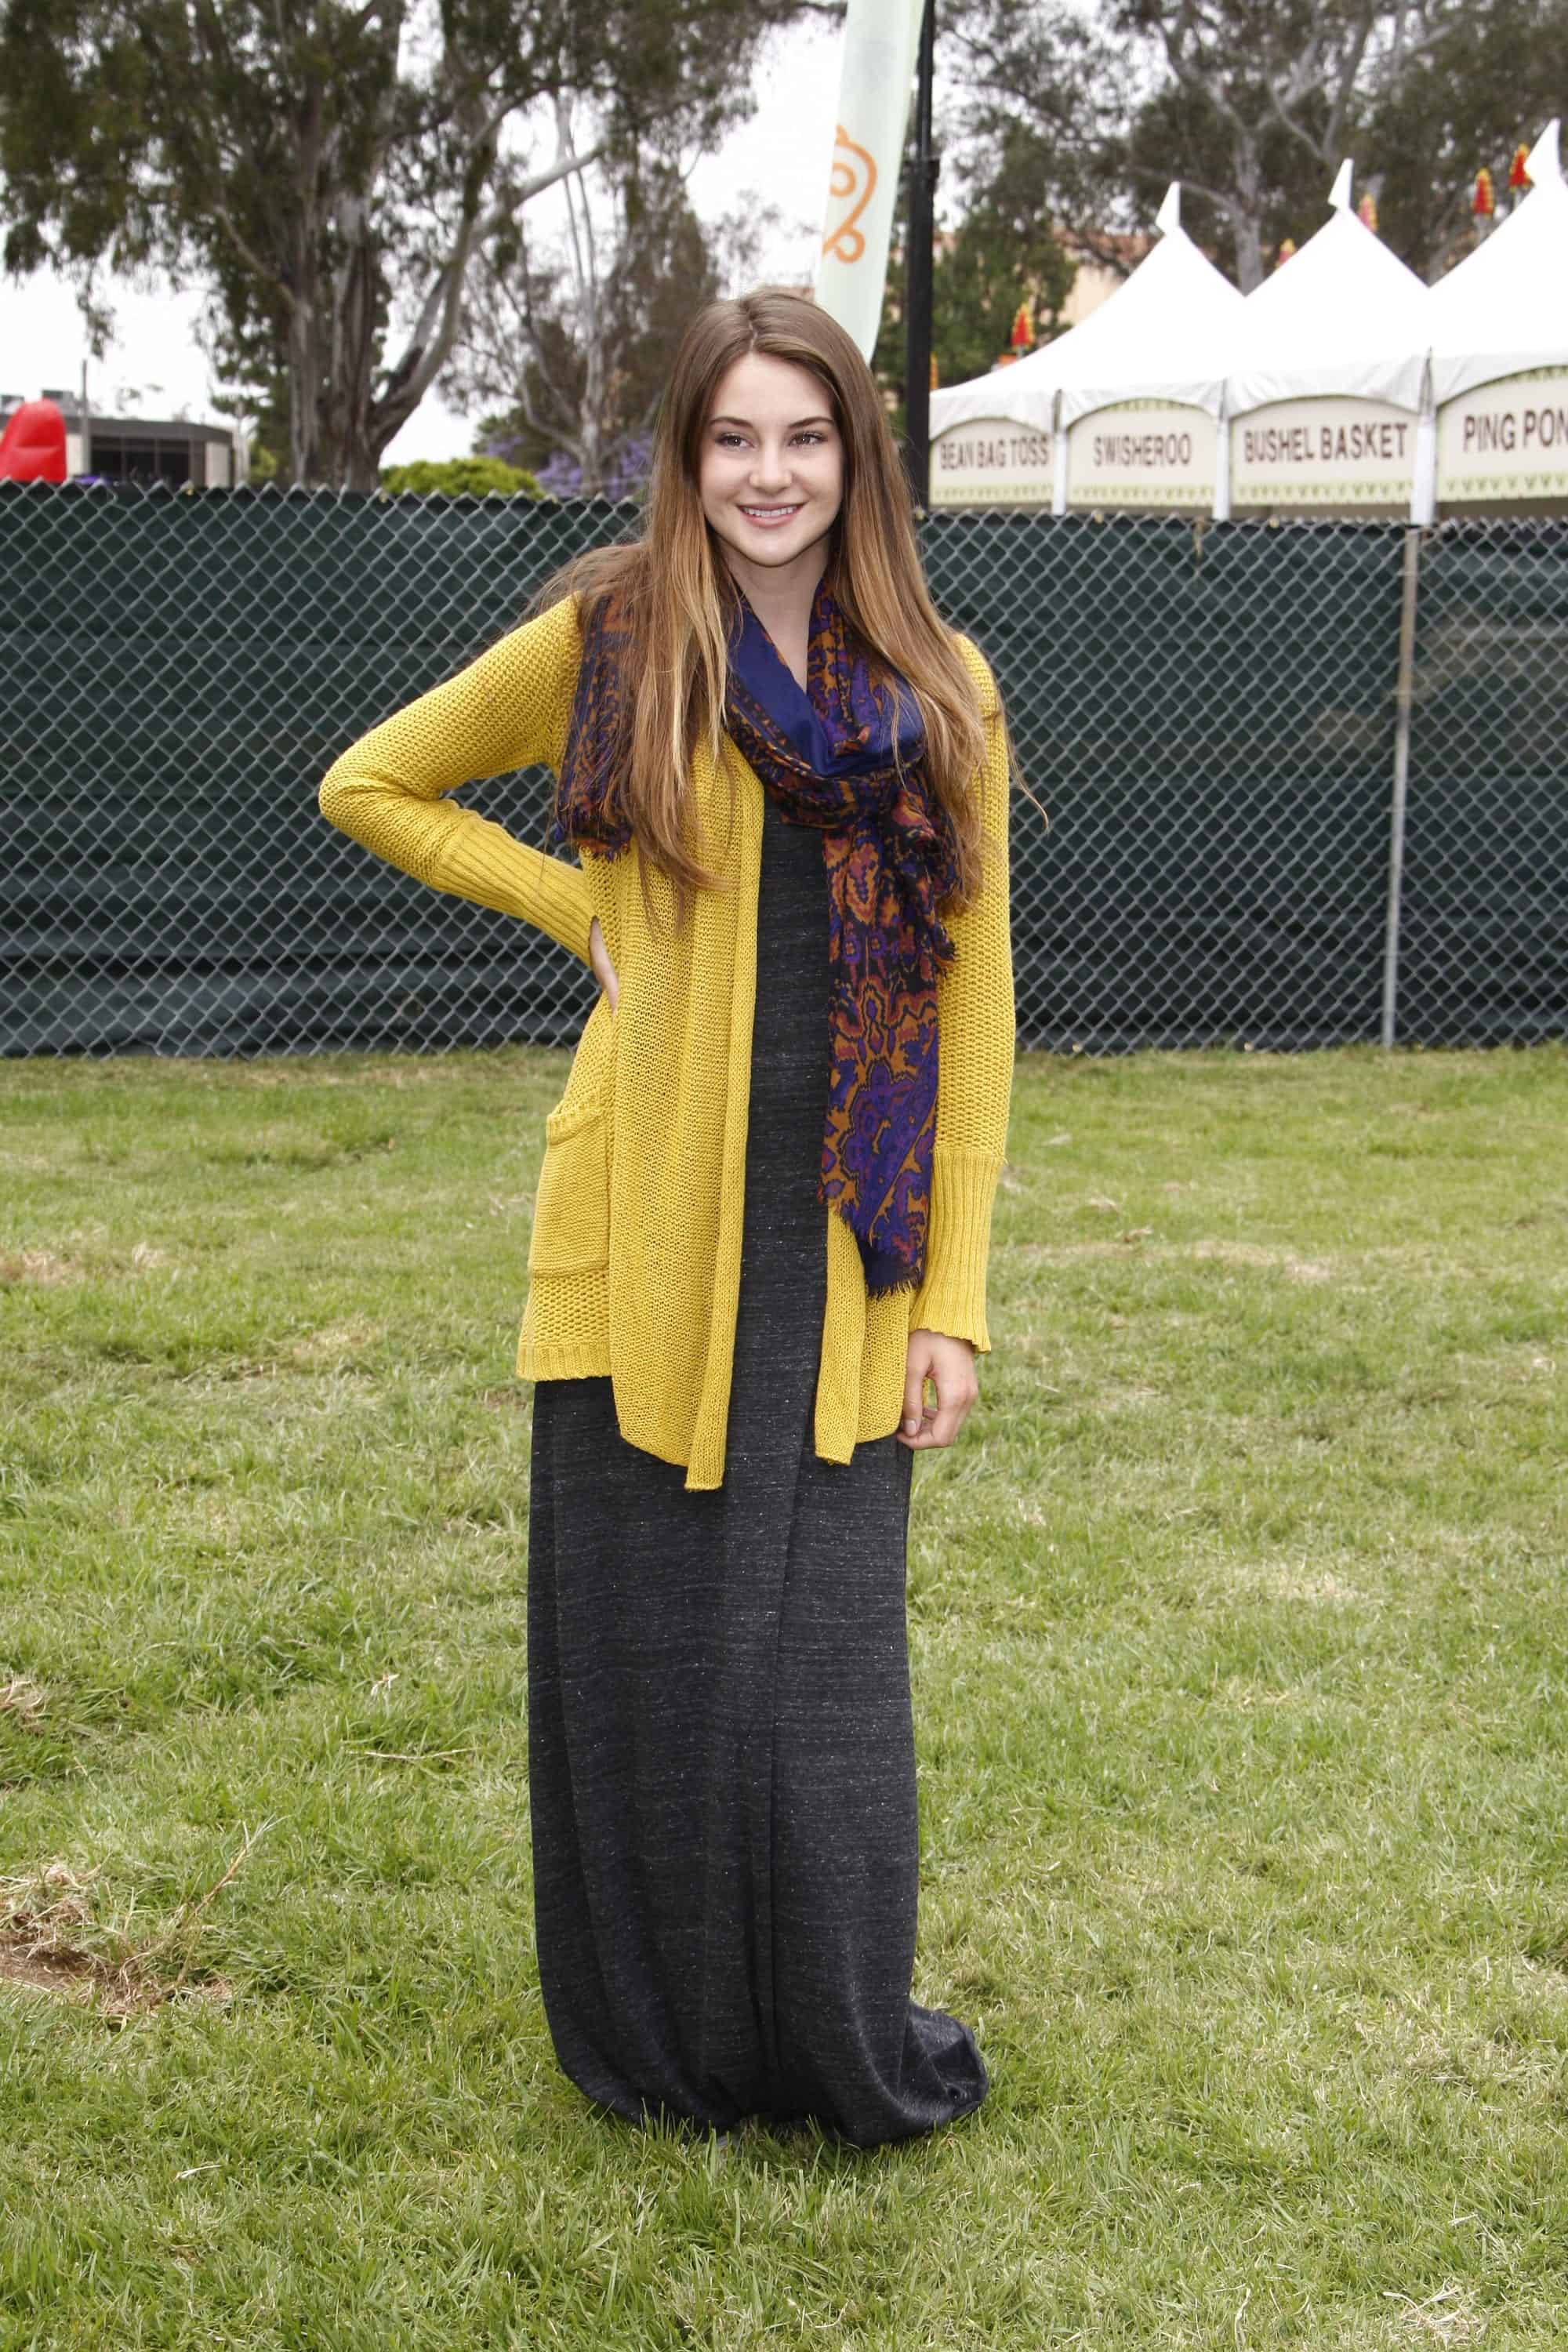 Shailene Woodley was at the 22nd Annual 'Time for Heroes' Celebrity Picnic at Wadsworth Theater on June 12, 2011 in Westwood, CA. She wore a yellow cardigan and a colorful scarf with her long and loose tousled brunette hairstyle that has highlights.